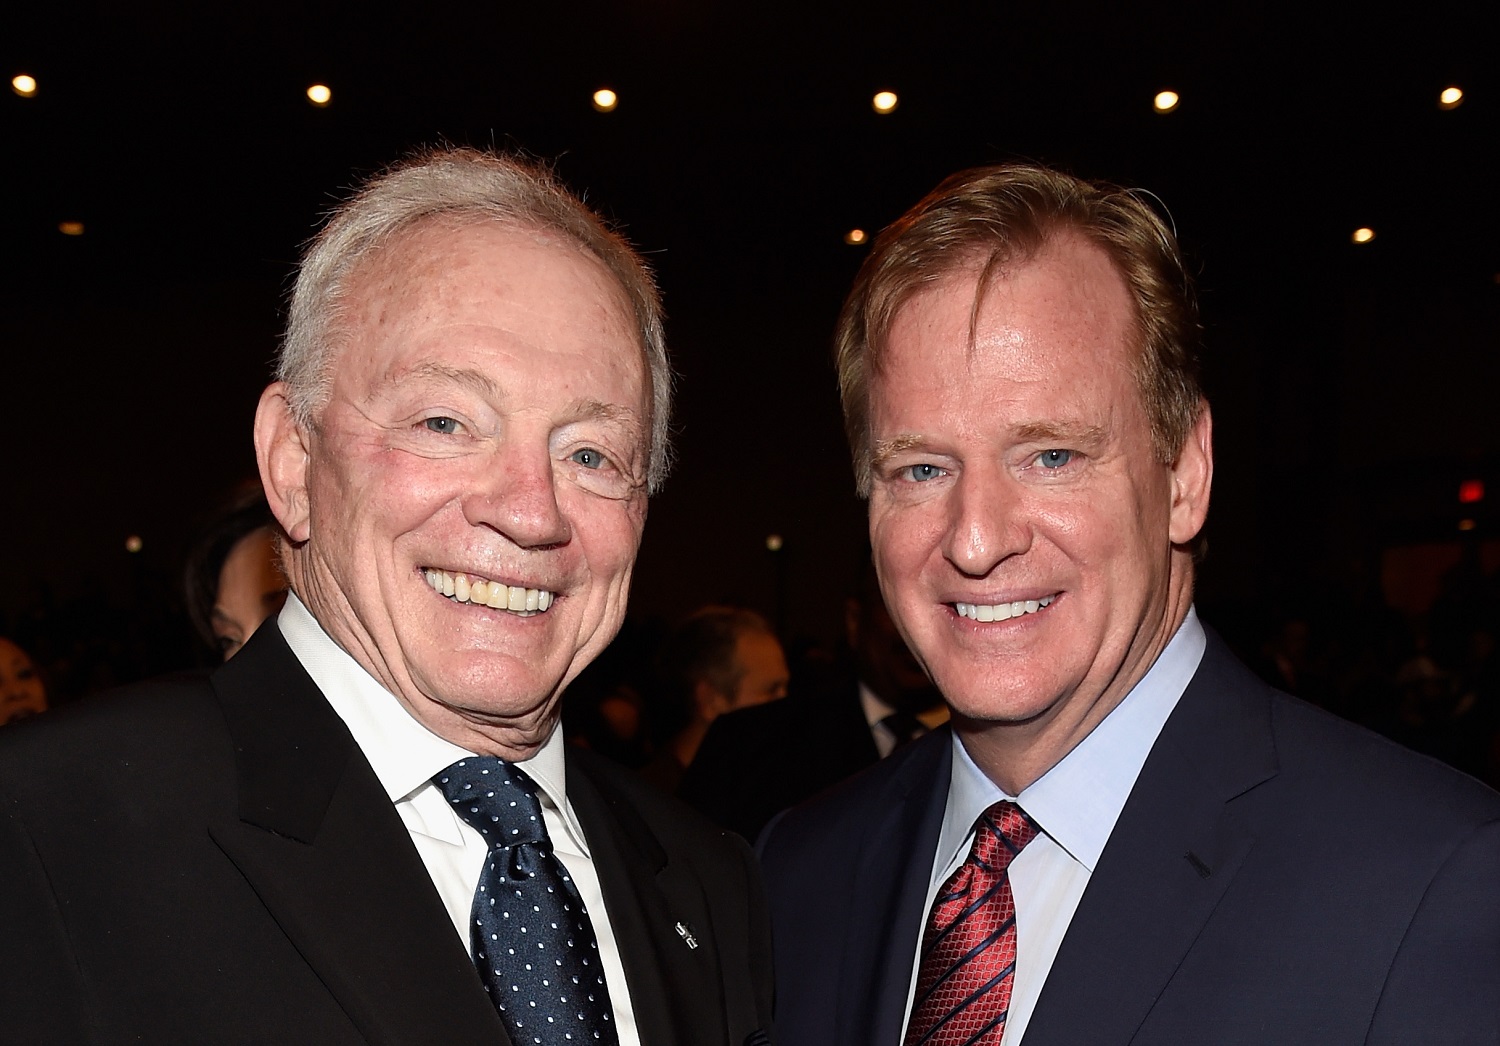 Bad Developments for Cowboys Haters: Dallas Is on Its Way Back, and Jerry Jones Is 1 of Roger Goodell’s Favorites